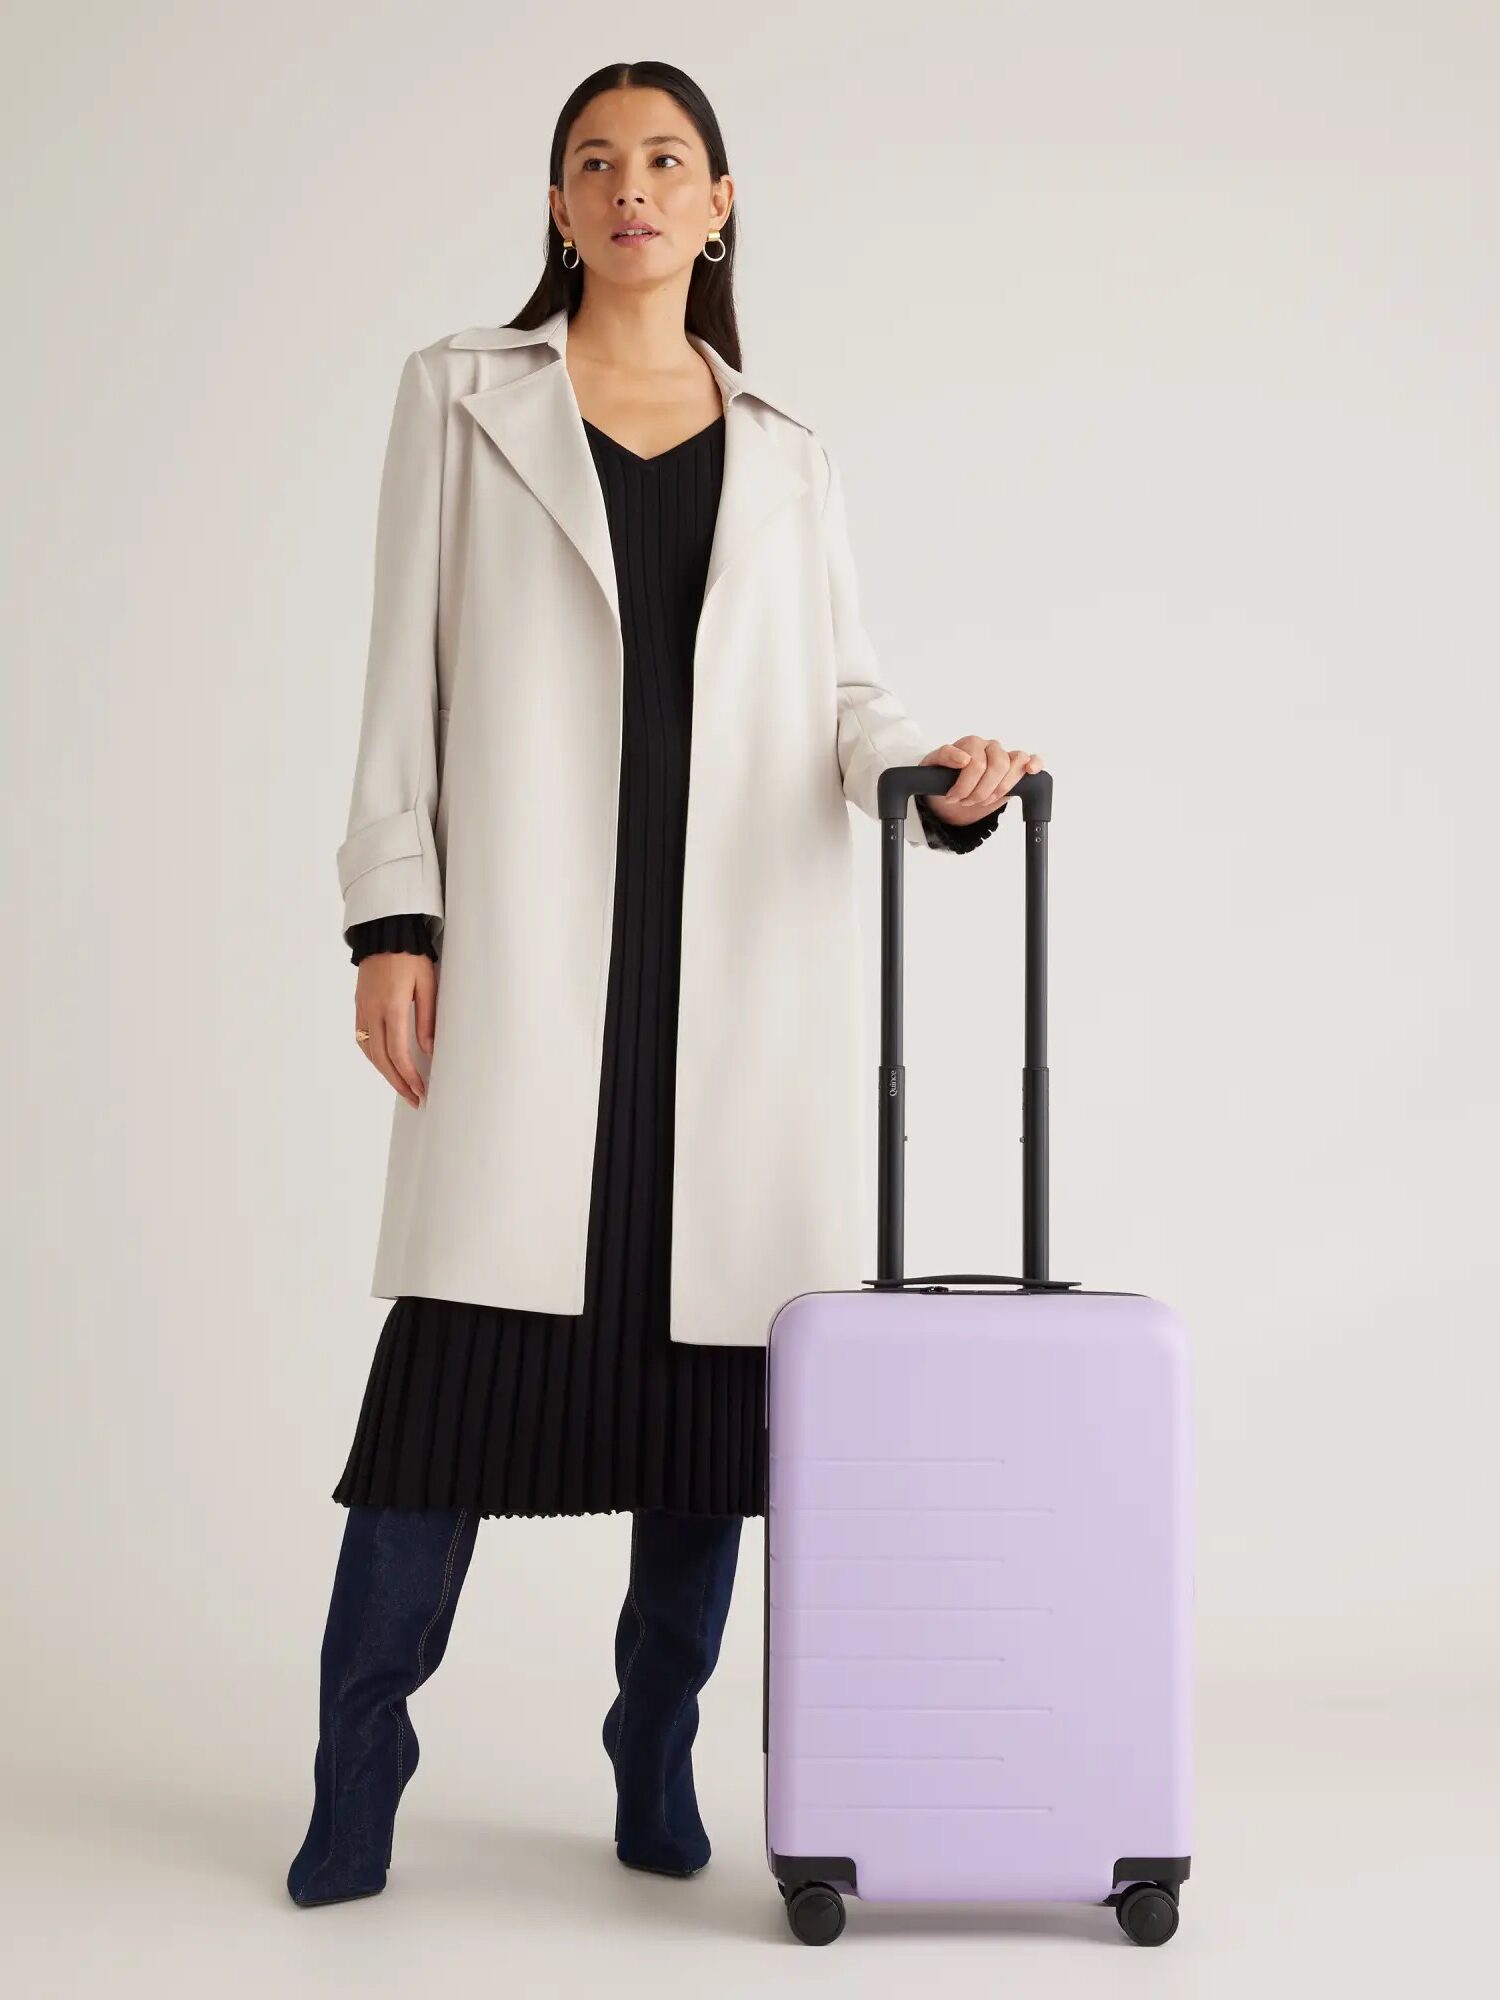 Woman in a stylish coat and boots standing with a purple suitcase, against a plain background.